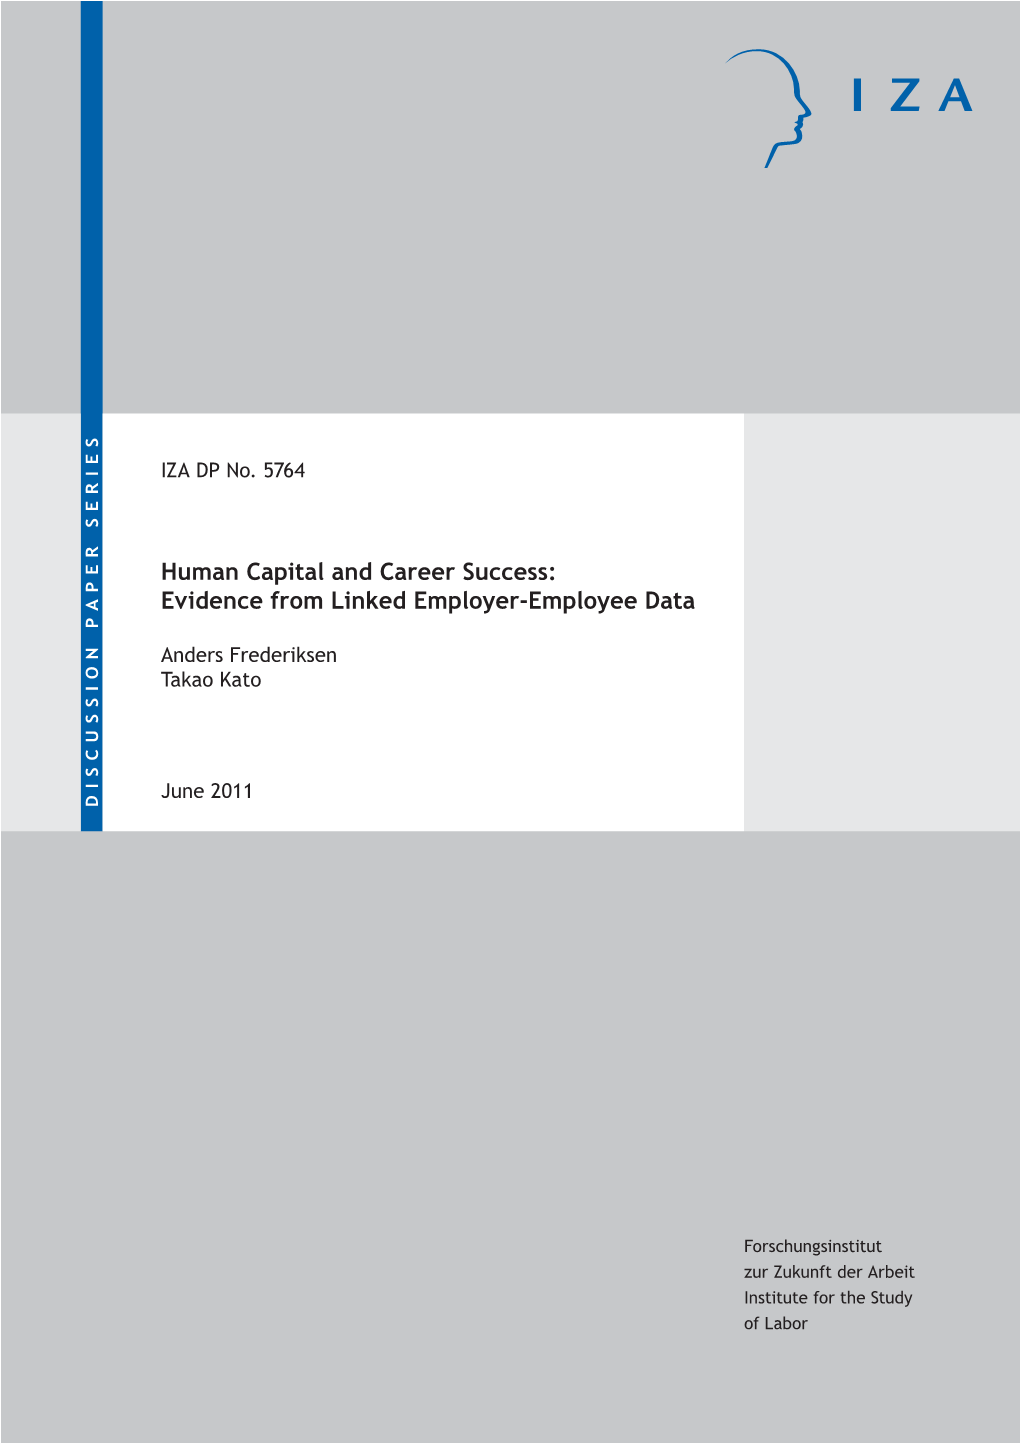 Human Capital and Career Success: Evidence from Linked Employer-Employee Data